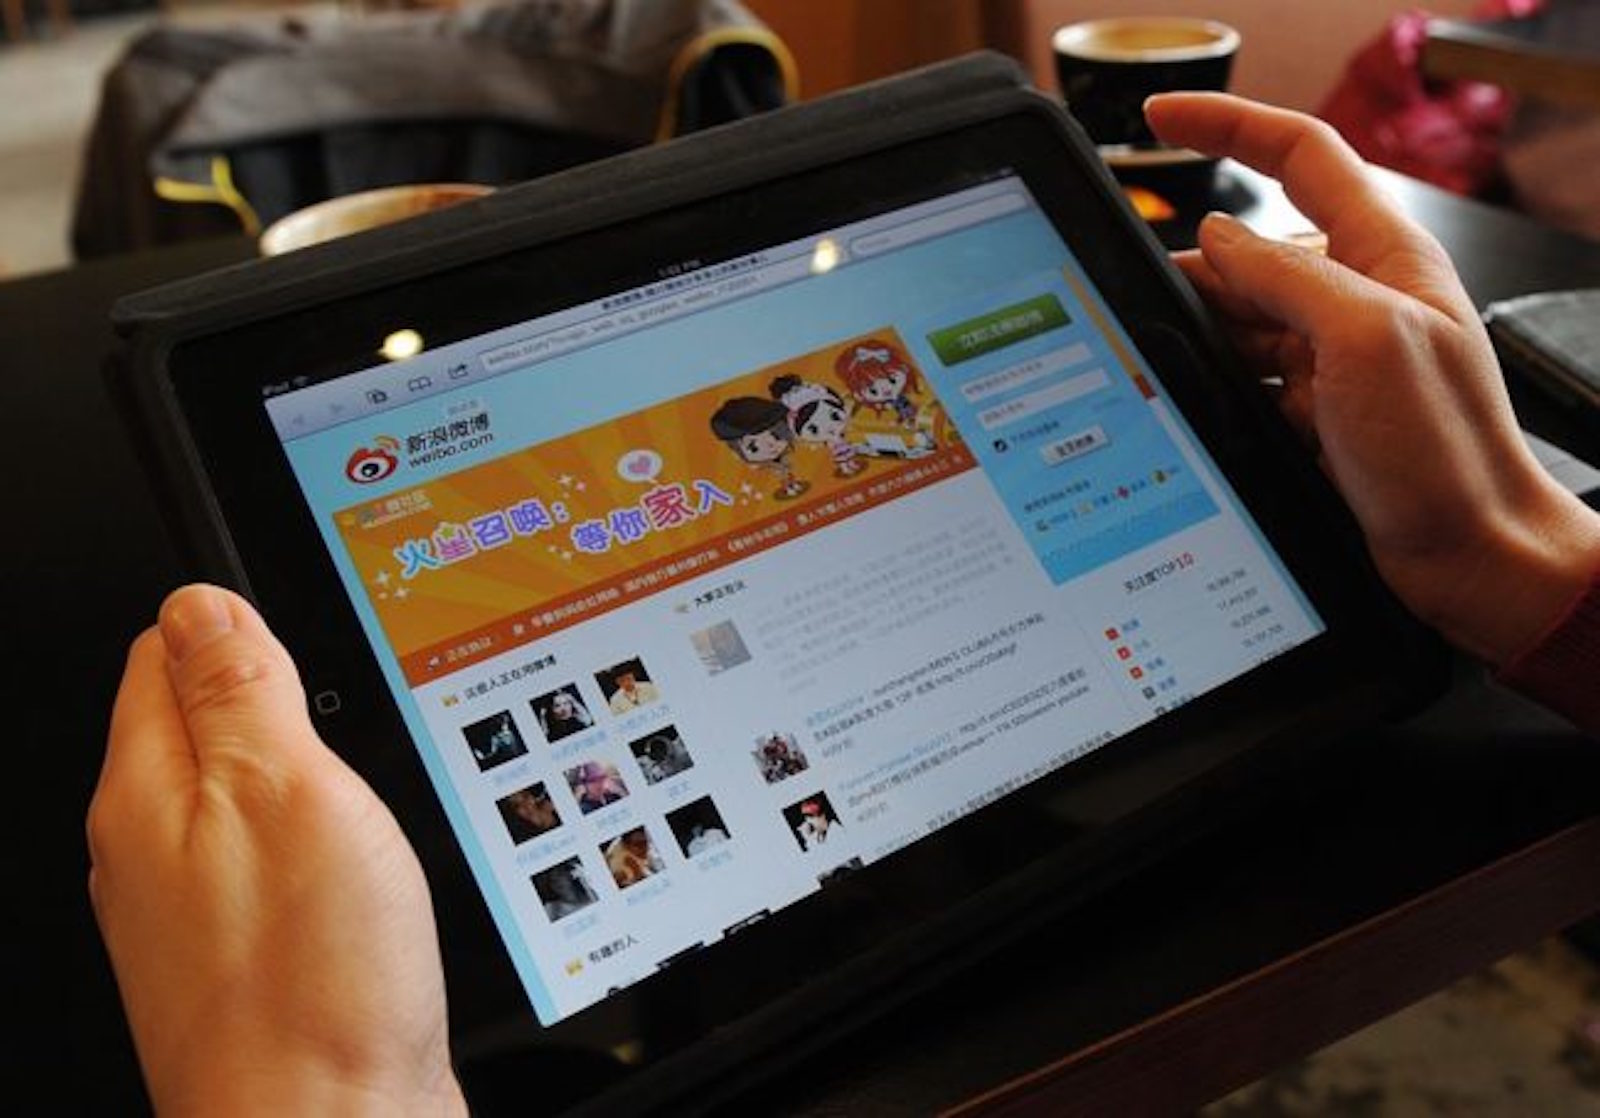 Sina Weibo site on a tablet.